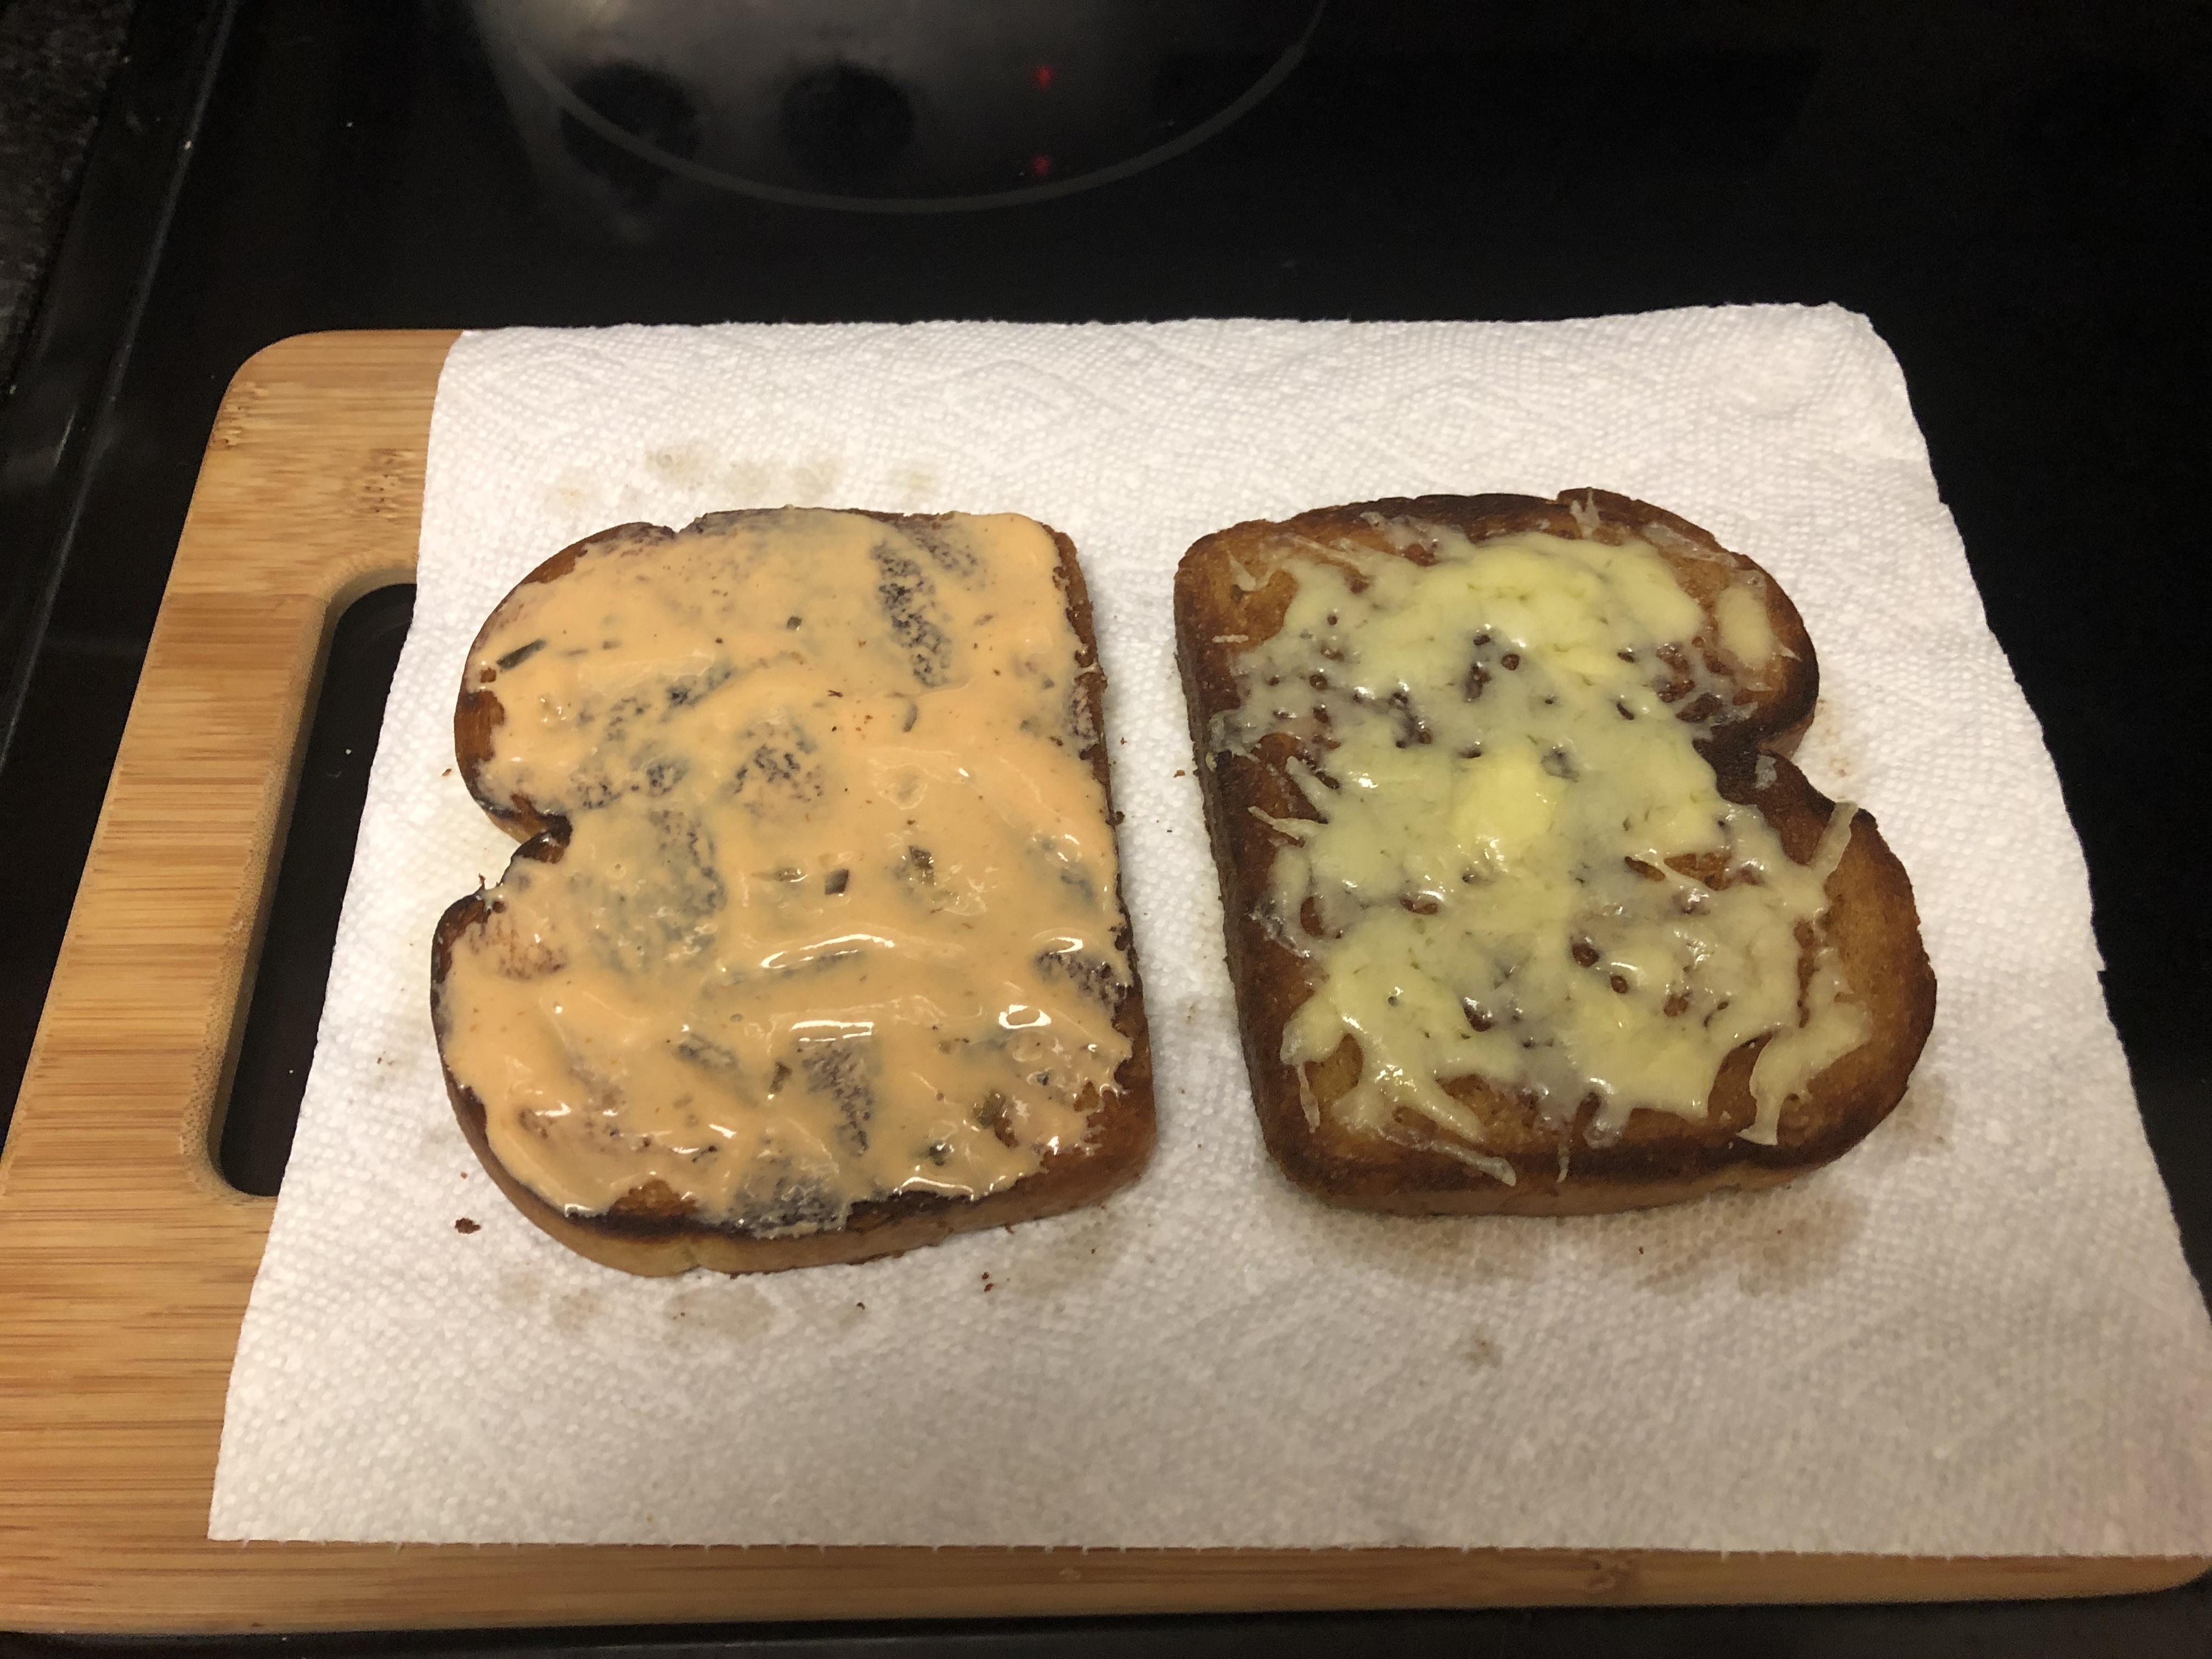 Bread with melted cheese and dressing